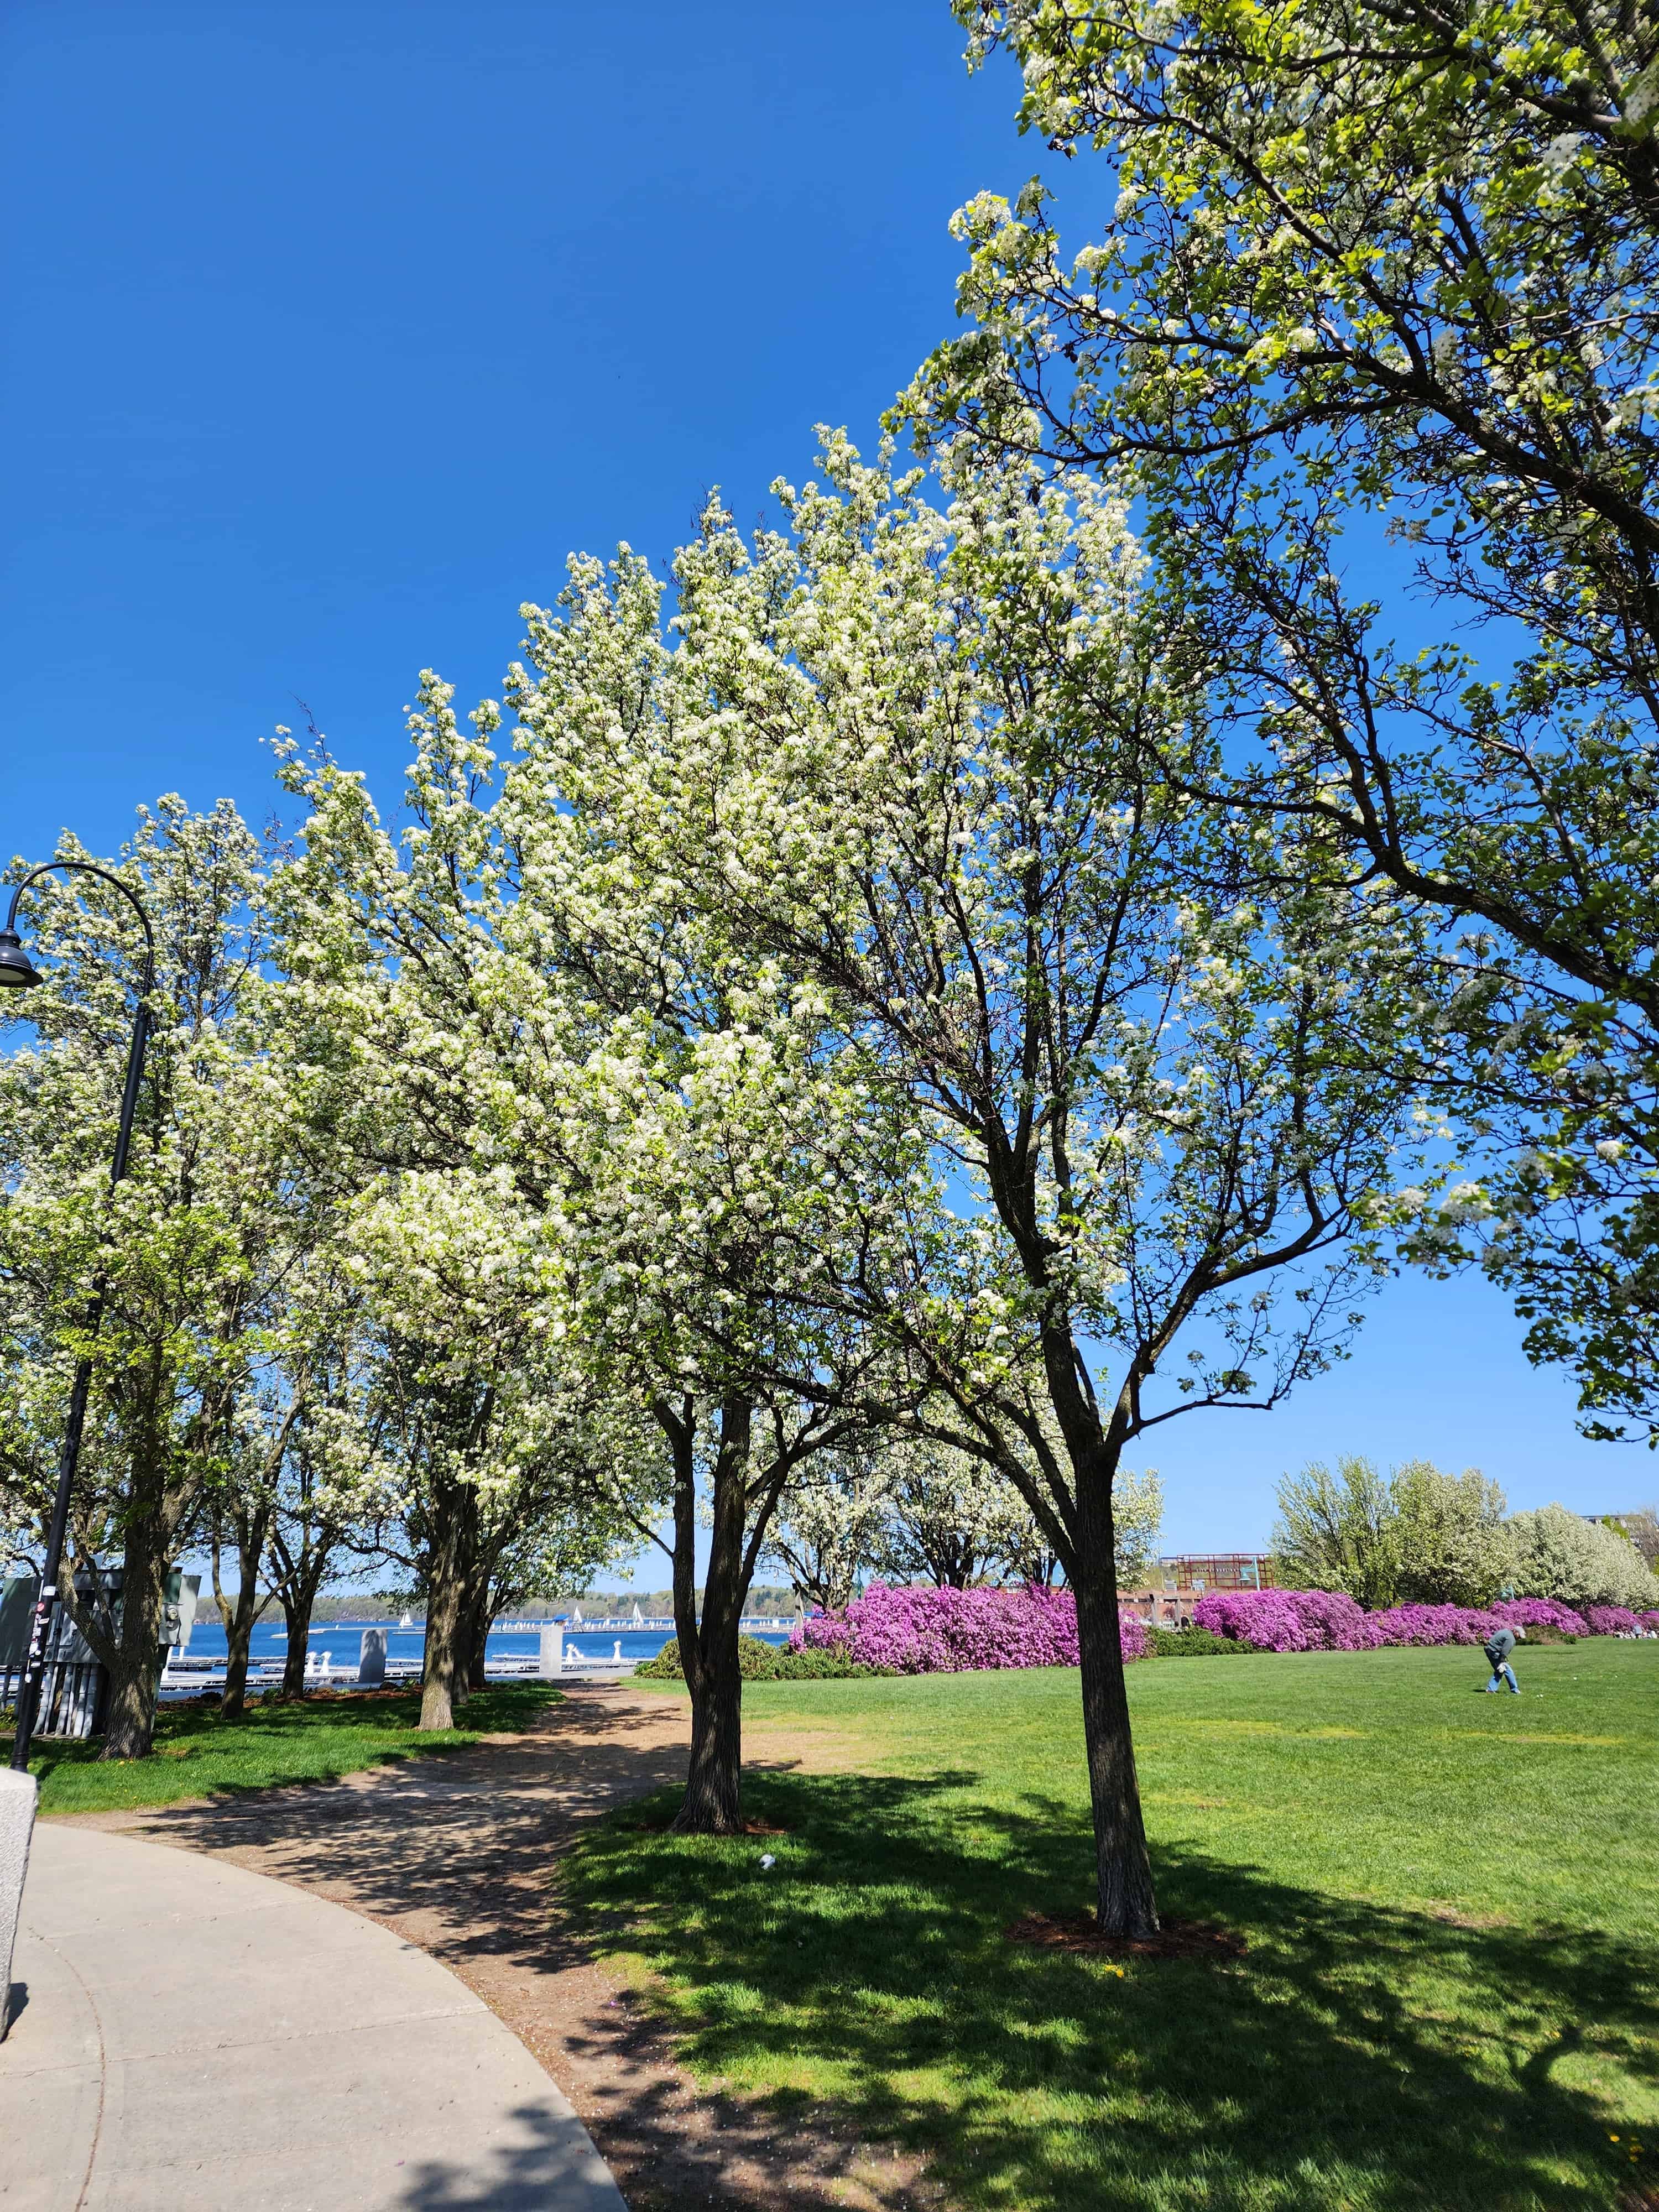 a sidewalk next to a stand of spring blooming trees. a small bit of a lake can be seen in the distance. a sunny day